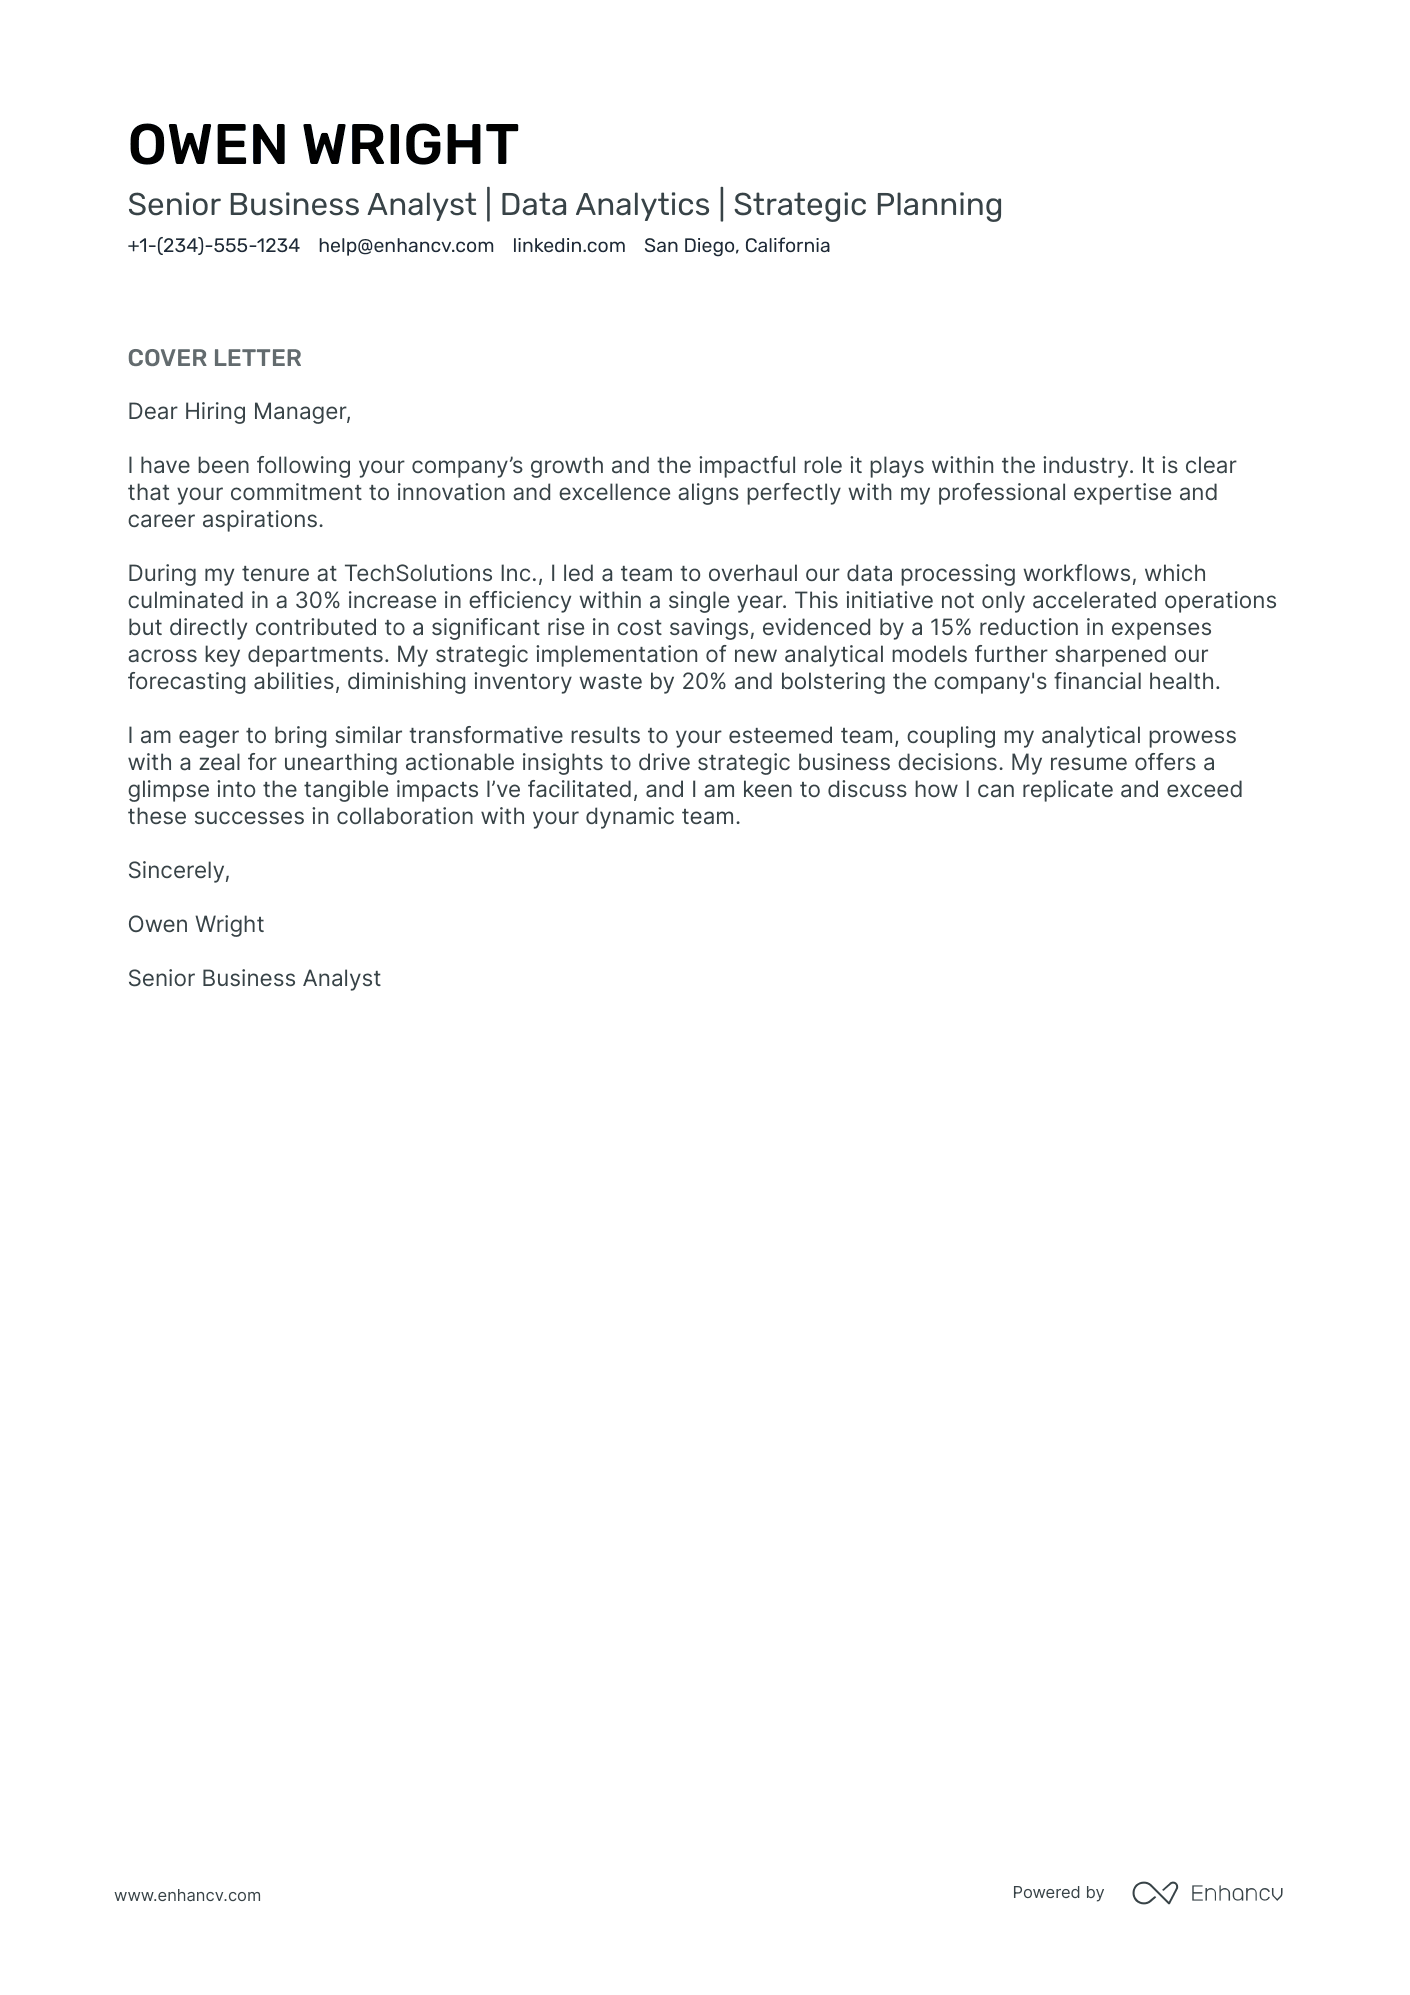 Excel Data Analyst cover letter